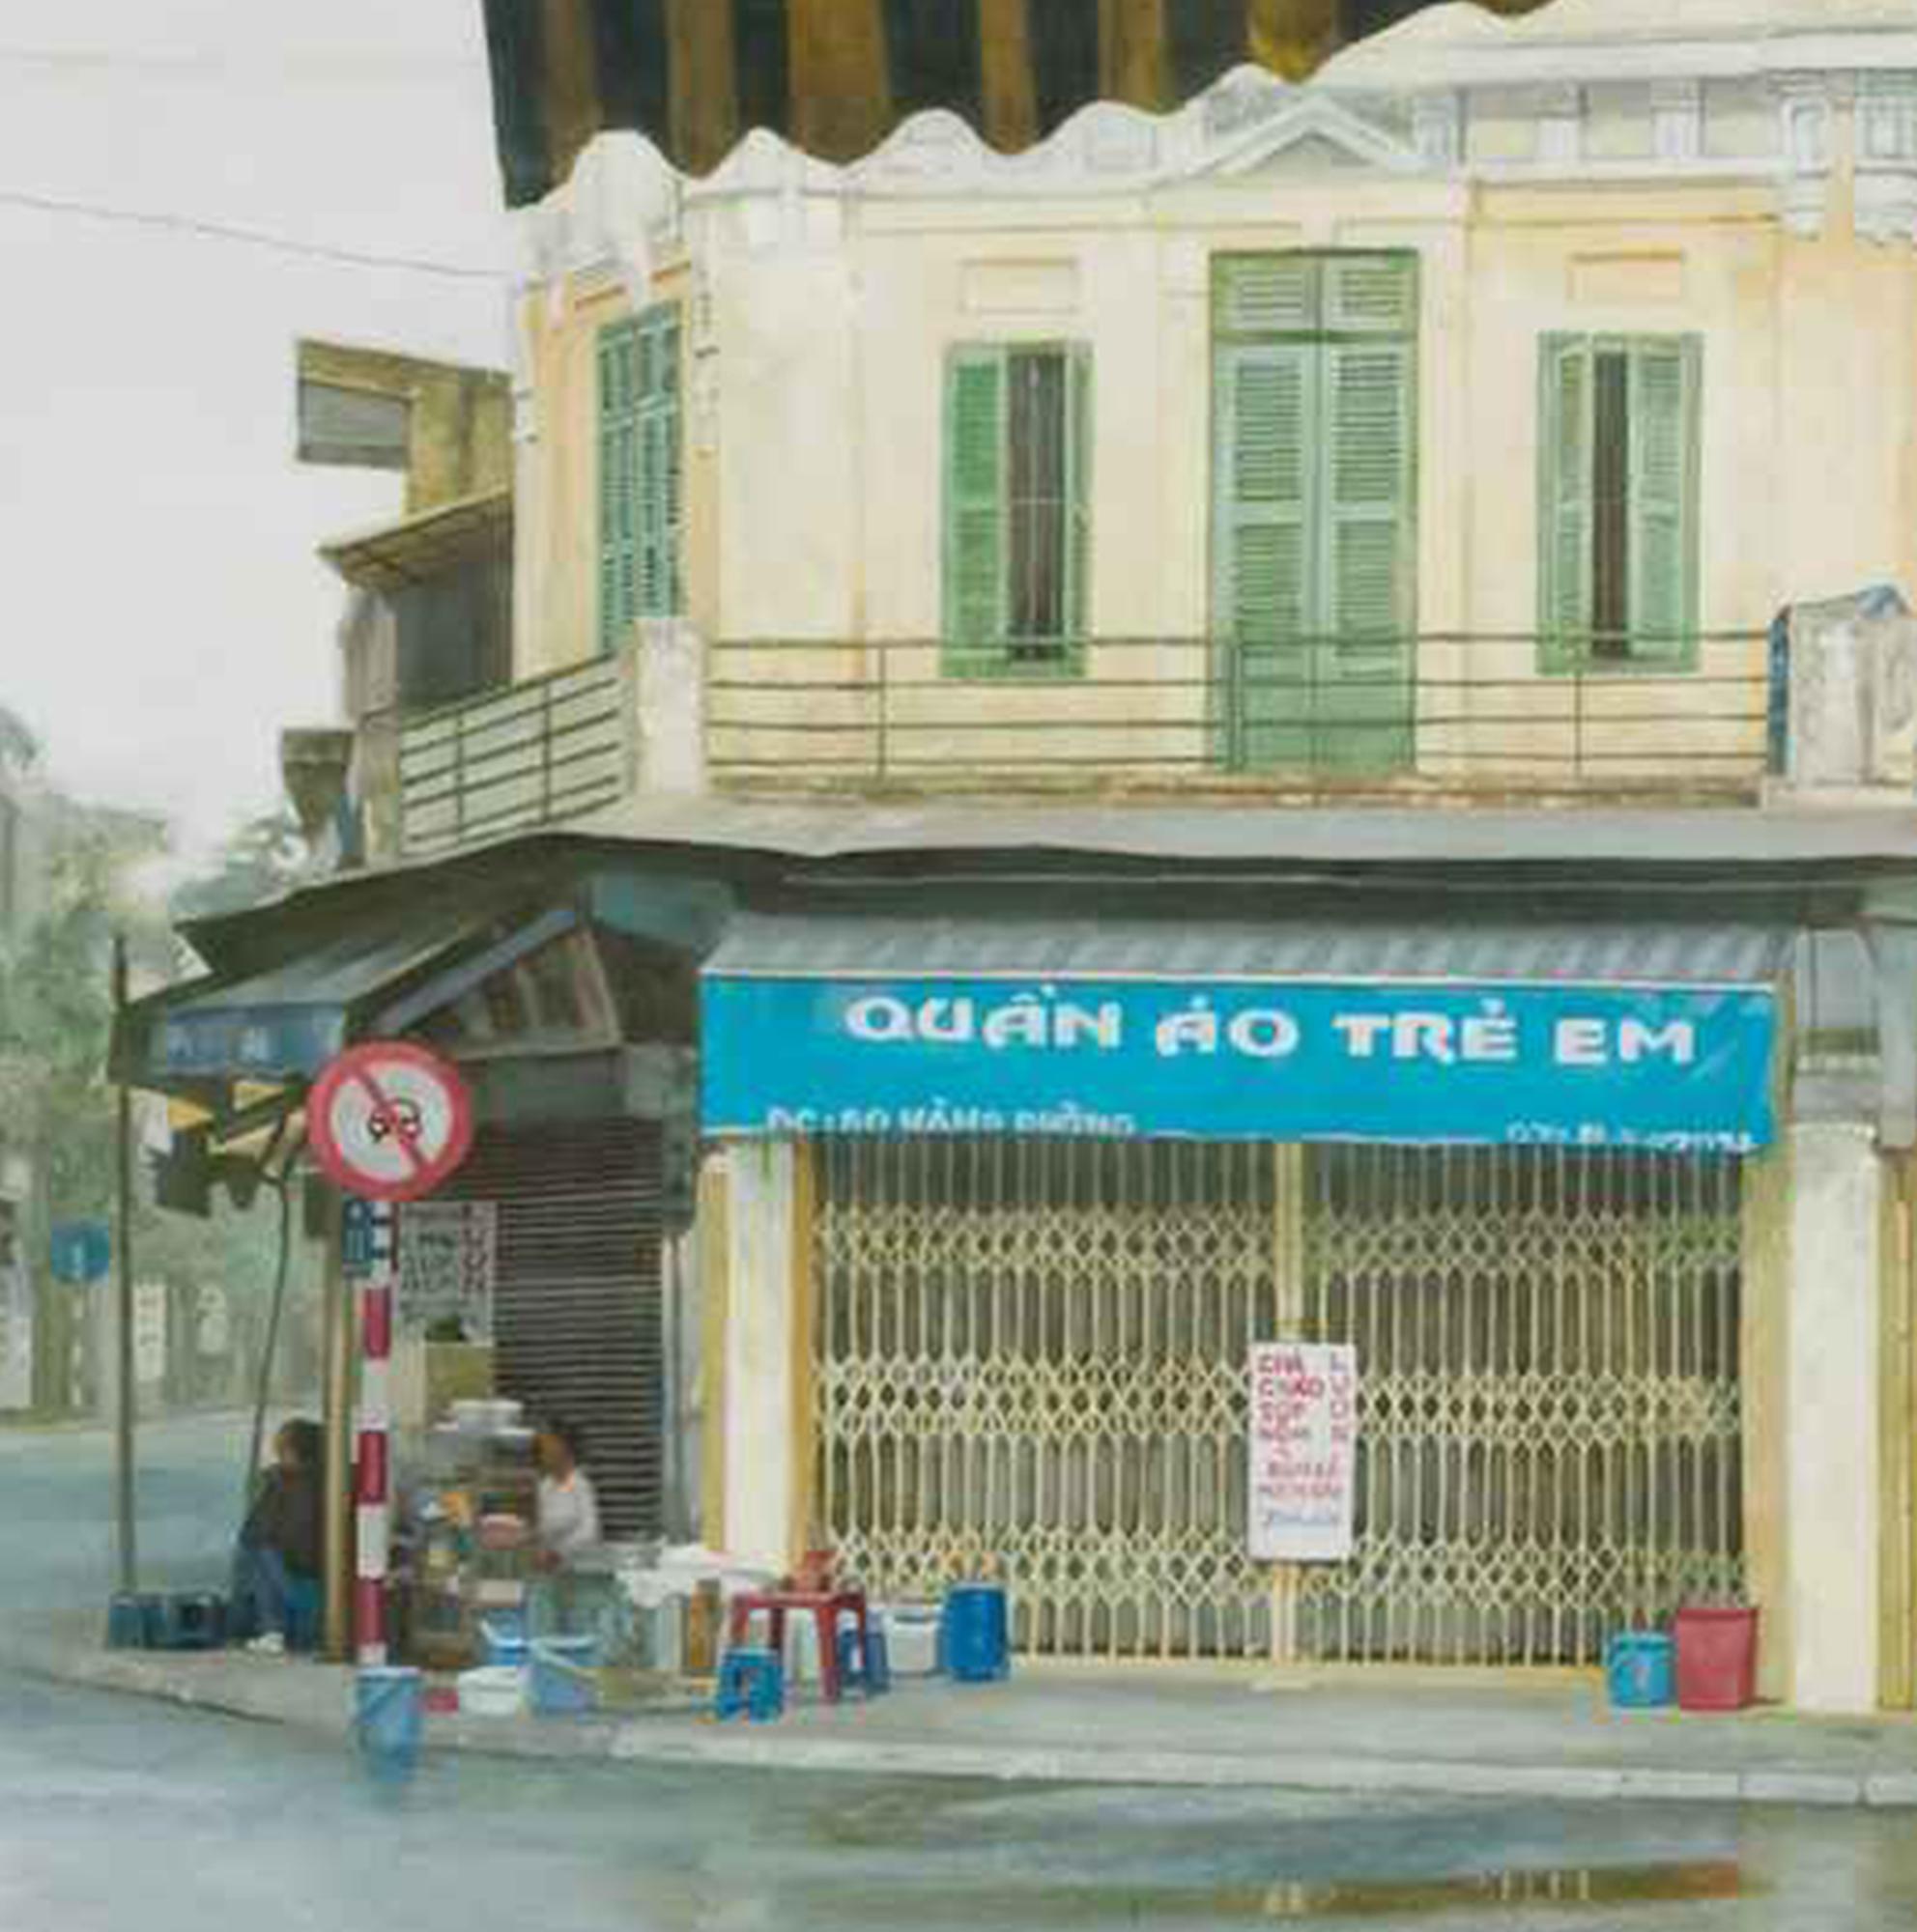 Pham BInh Chuong has an photo realistic quality to his lacquer on wood paintings.  He uses bright colors in his modern Vietnam street scenes.